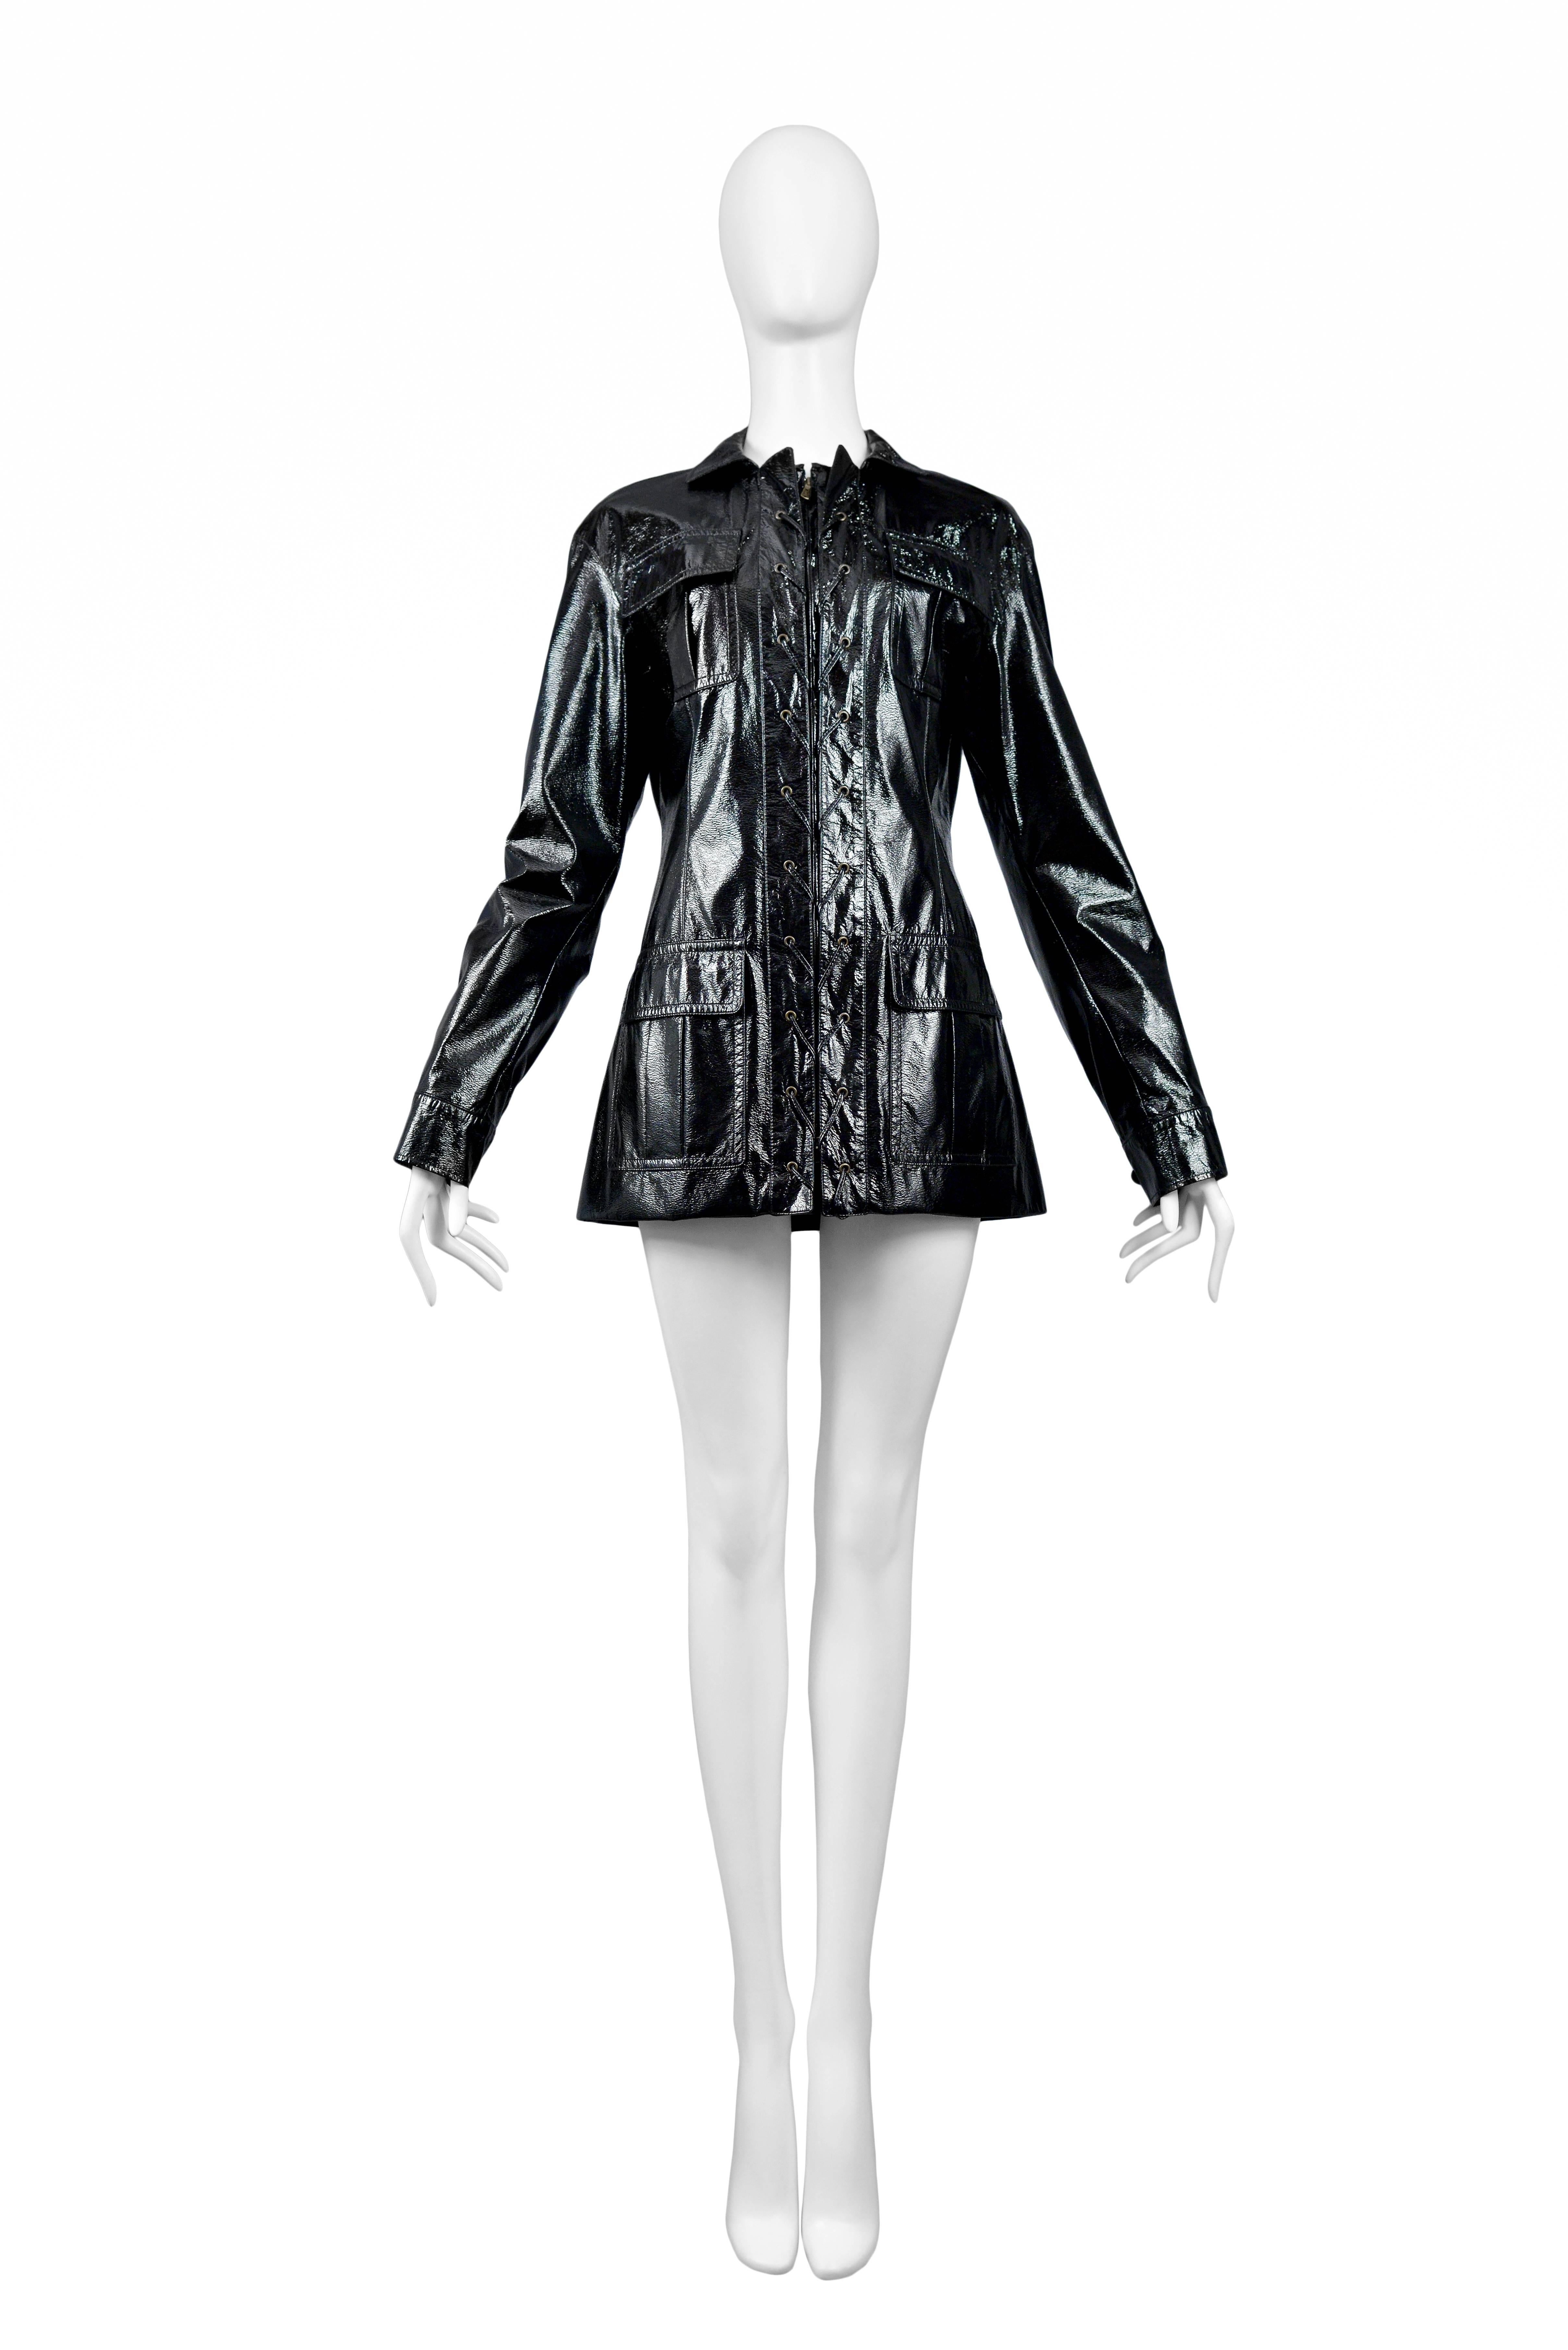 Vintage Stefano Pilati for Yves Saint Laurent black patent leather safari jacket featuring pockets at the chest and hips, a zip front closure and lace up detailing up the front.
Please inquire for additional images.